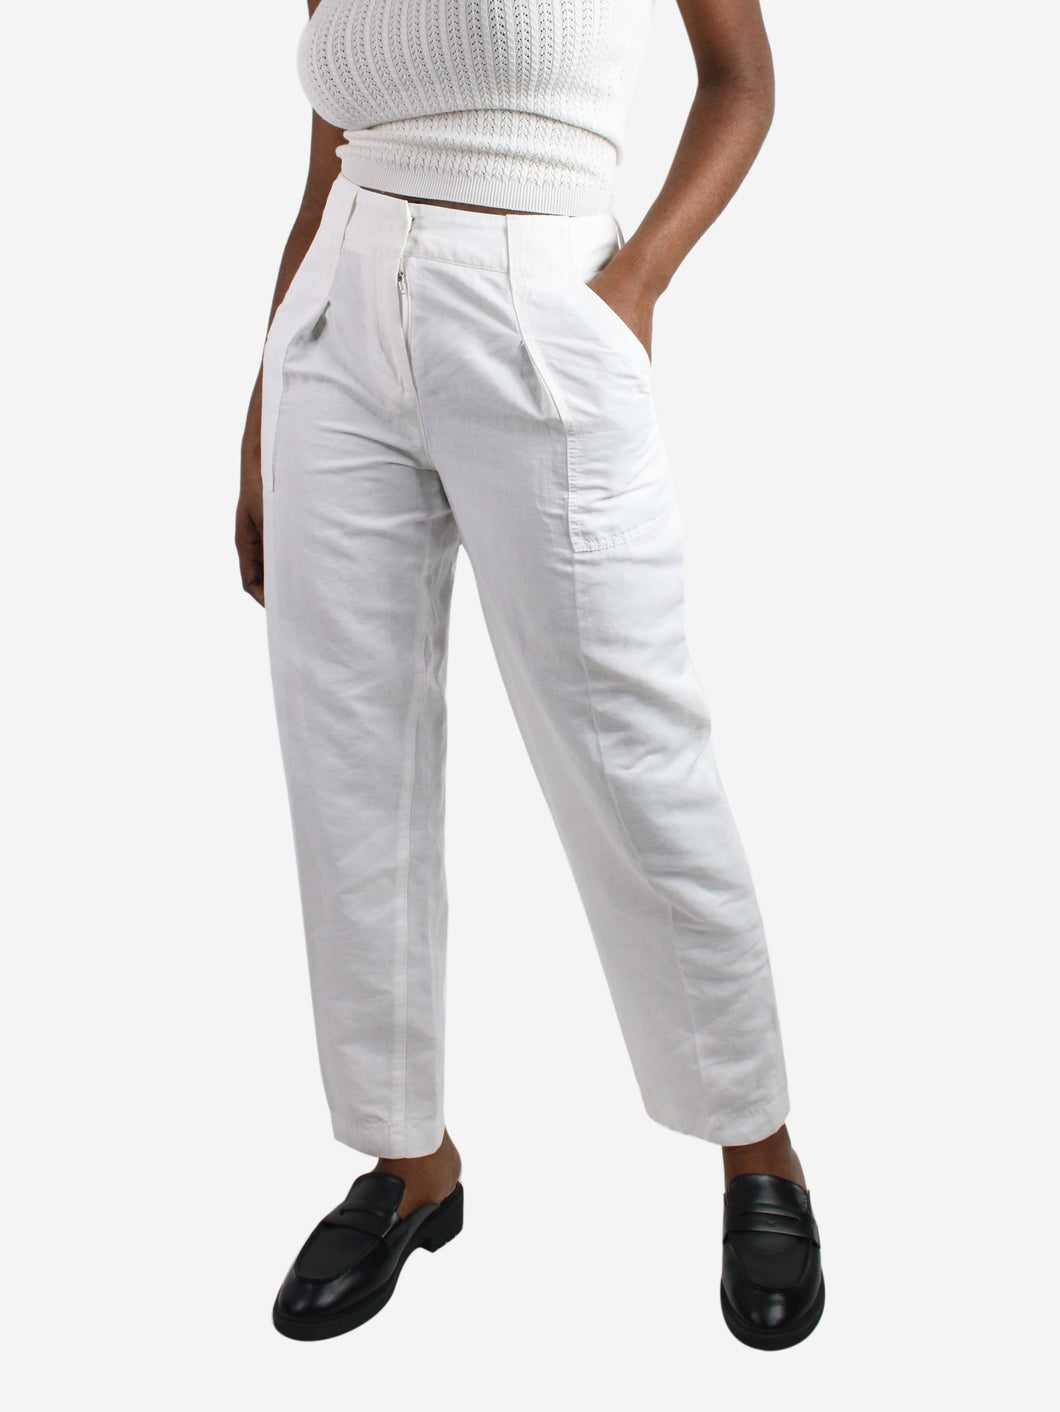 White loose-fit linen trousers - size UK 10 Trousers Luisa Cerano 